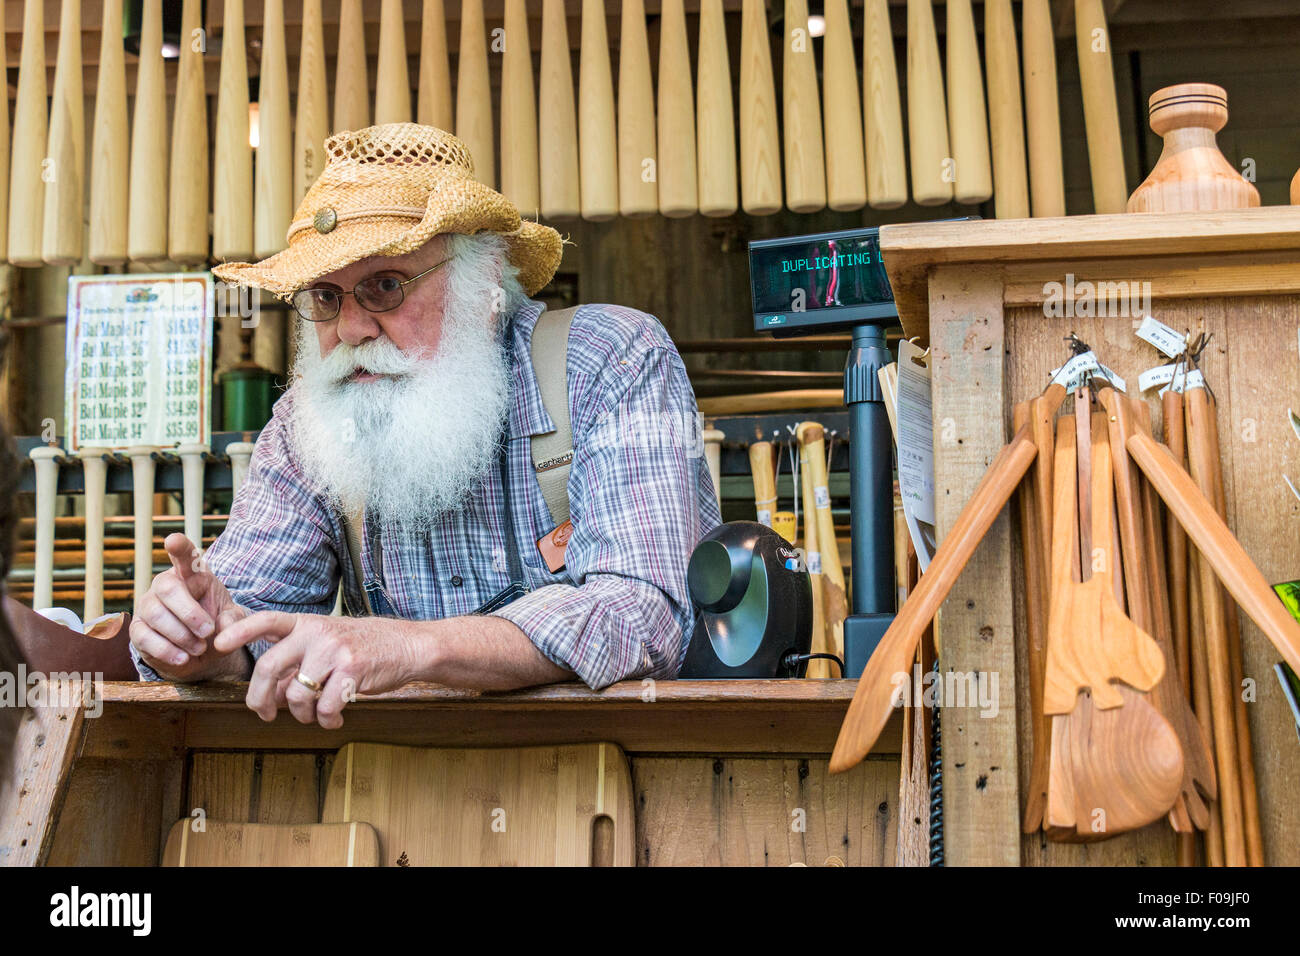 One of several wood carvers at Silver Dollar City, an 1880s theme amusement park near Branson, MO. Stock Photo